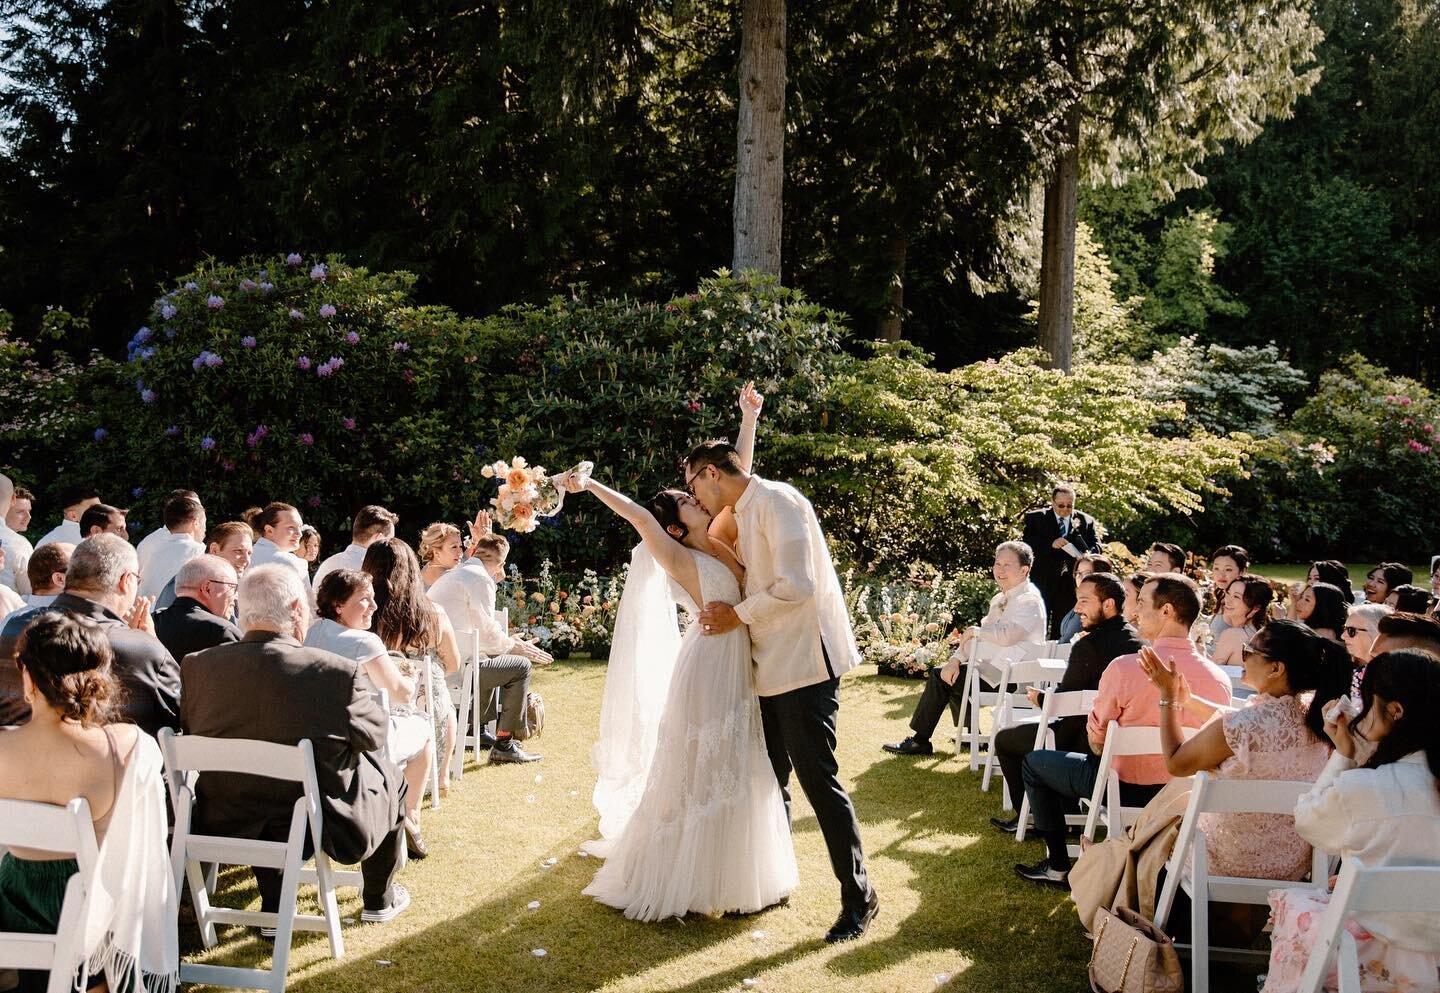 MAHAL KITA 🫶🏻

Chrissie &amp; Chris, thank you for trusting us with your big day - we loved every minute of it 🤍

Venue @westwoodplateaugolfclub 
Photographer @paramountweddings 
Videographer @amecollectiveinc 
Florals @thistlebotanical 
Photo Boo